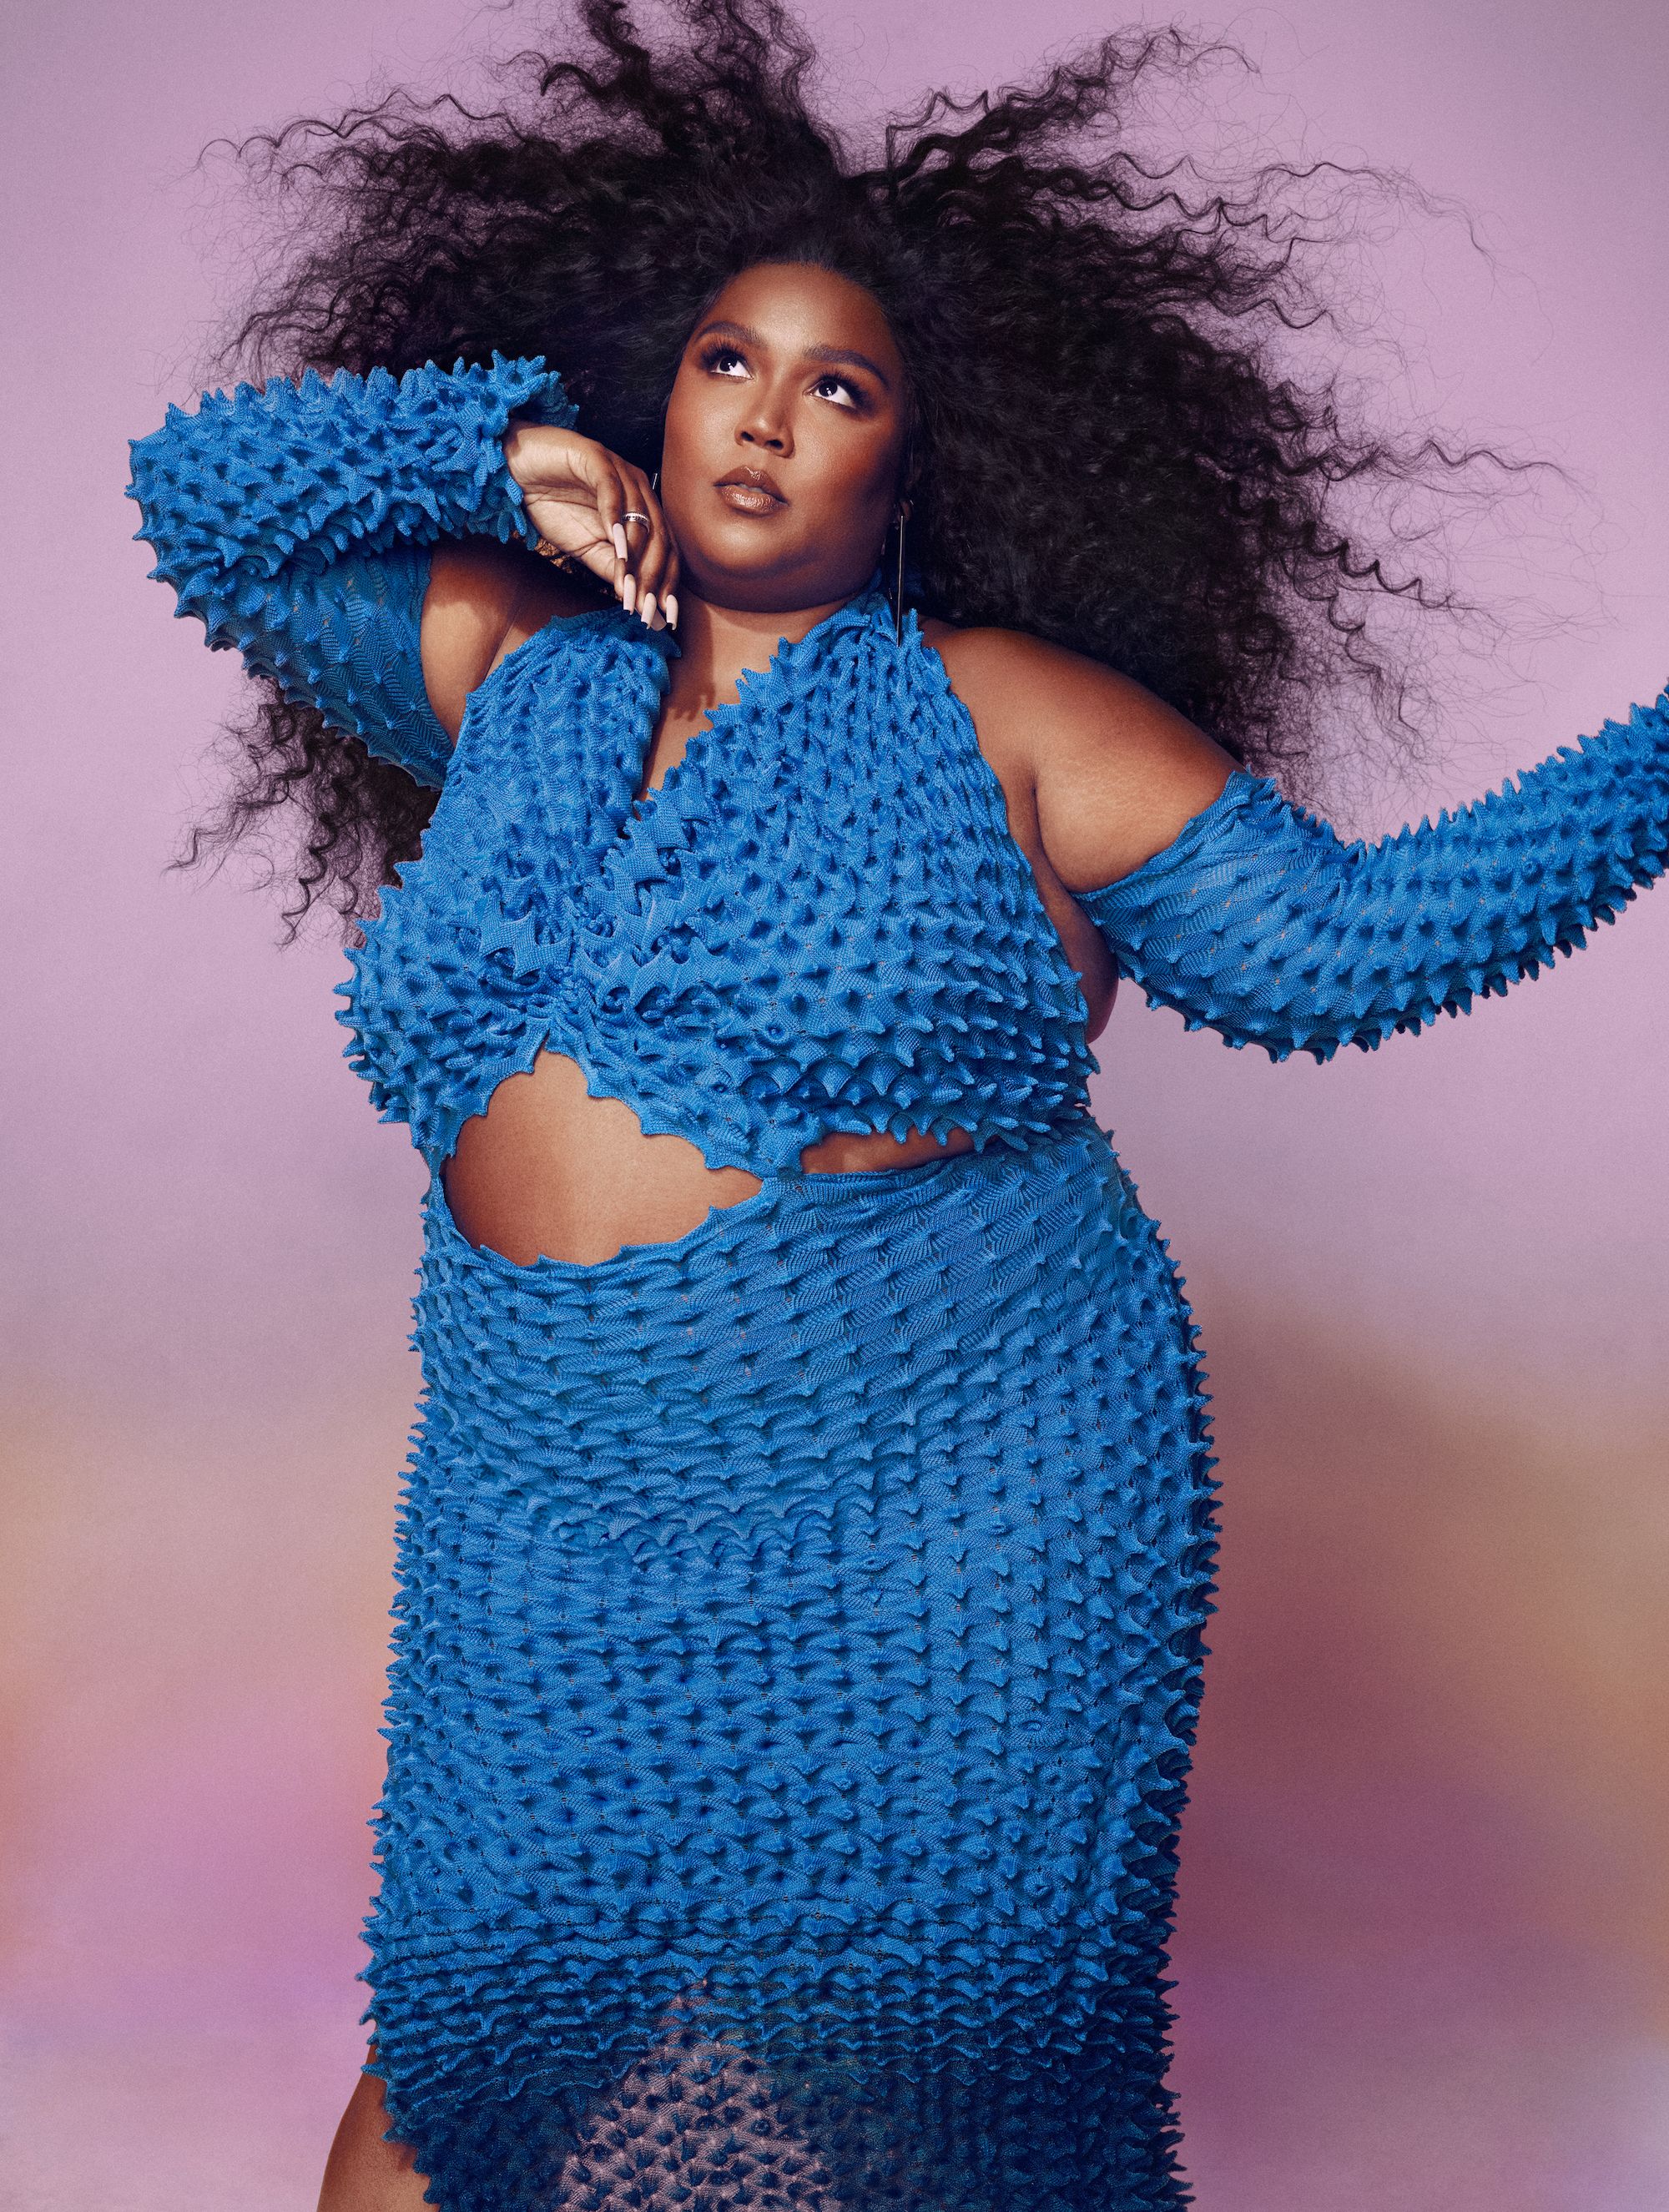 Lizzo Talks Straight About Her Body: 'Yes, I Know I'm Fat,' Shows